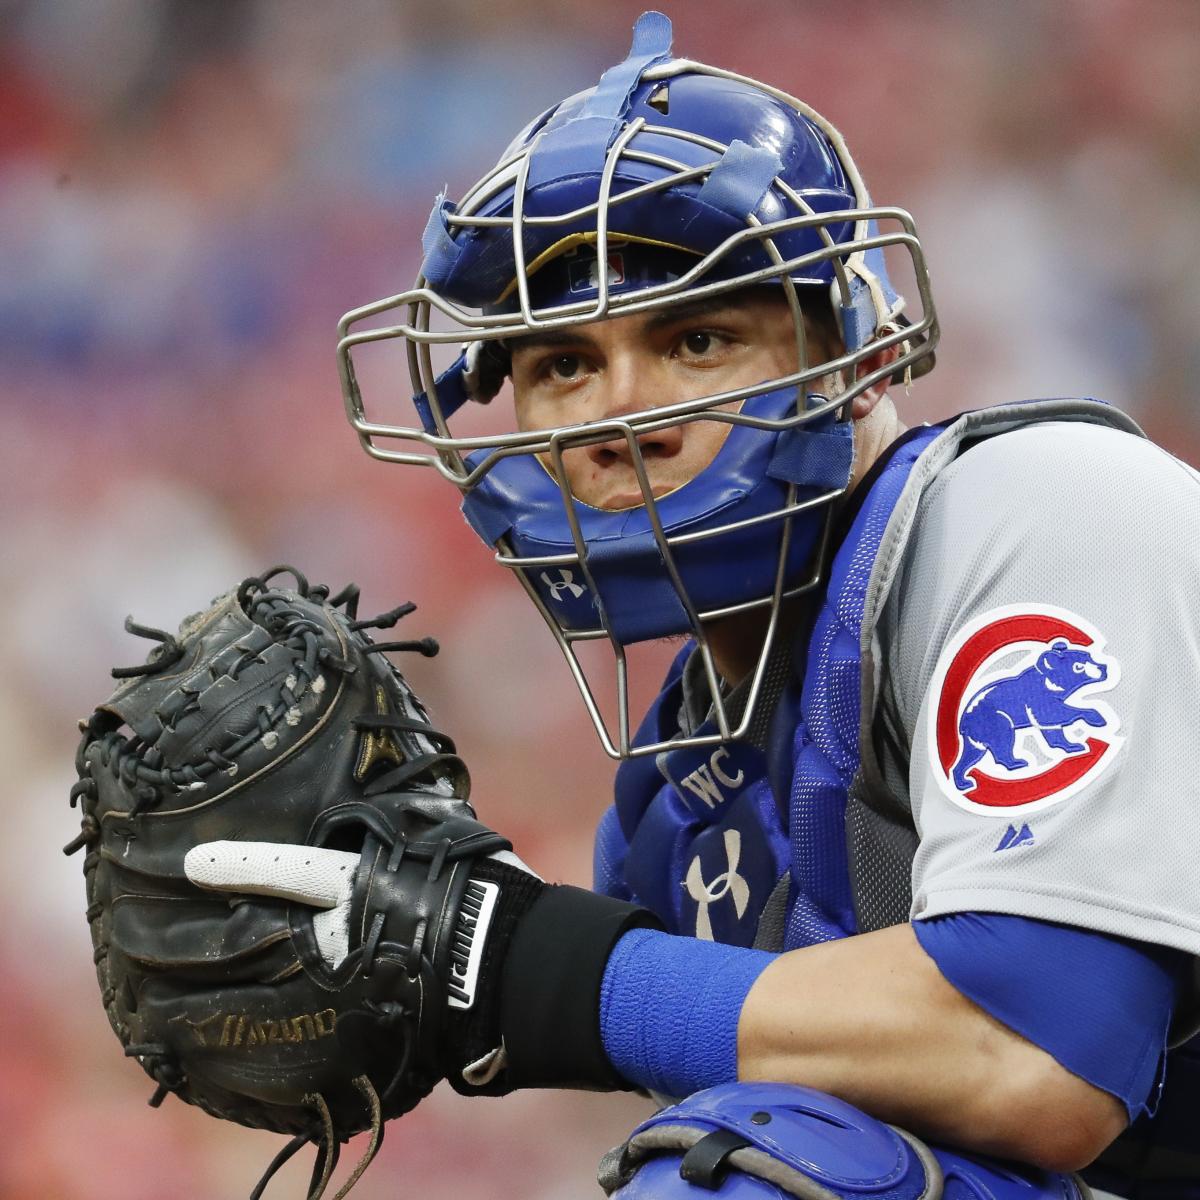 Willson Contreras and the Cubs are pumped for Rawlings Glove Day